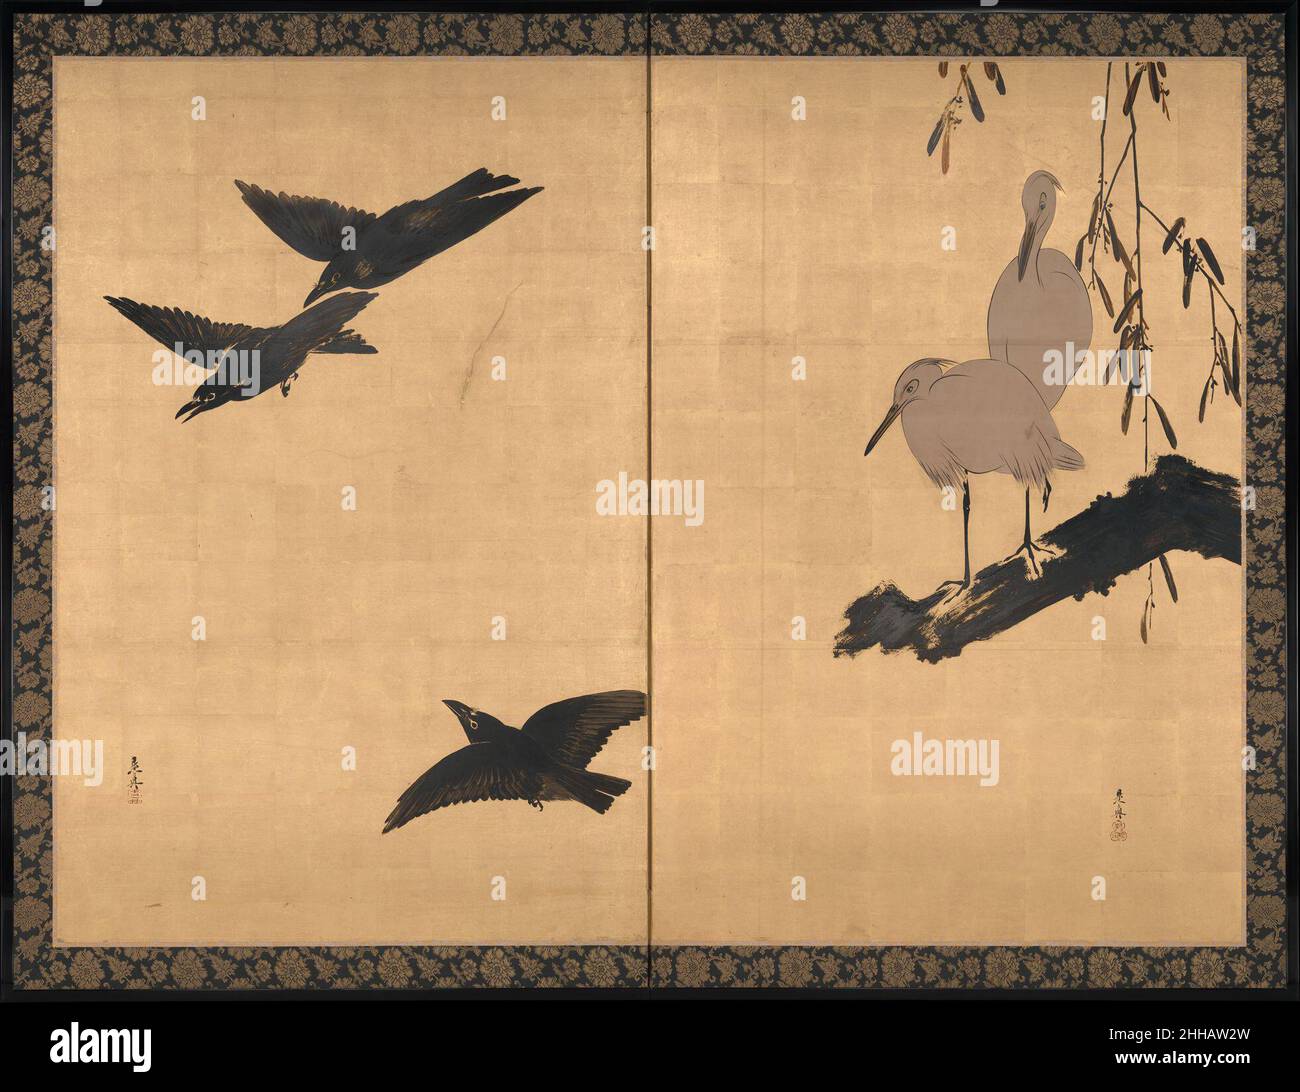 Egrets and Crows late 19th century Shibata Zeshin Japanese The two panels of this brilliant gold-leaf screen display contrasting scenes of two egrets at rest and three crows in flight, with white and black forms counterbalancing each other to mesmerizing effect. The white color of the egrets was accomplished by cutting out the gold-leaf layer and exposing the paper, a technique the artist used on other examples of avian painting. Shibata Zeshin was predominantly known as a master lacquer craftsman, and also incorporated the technique into his paintings. Here, the lacquer employed in place of i Stock Photo